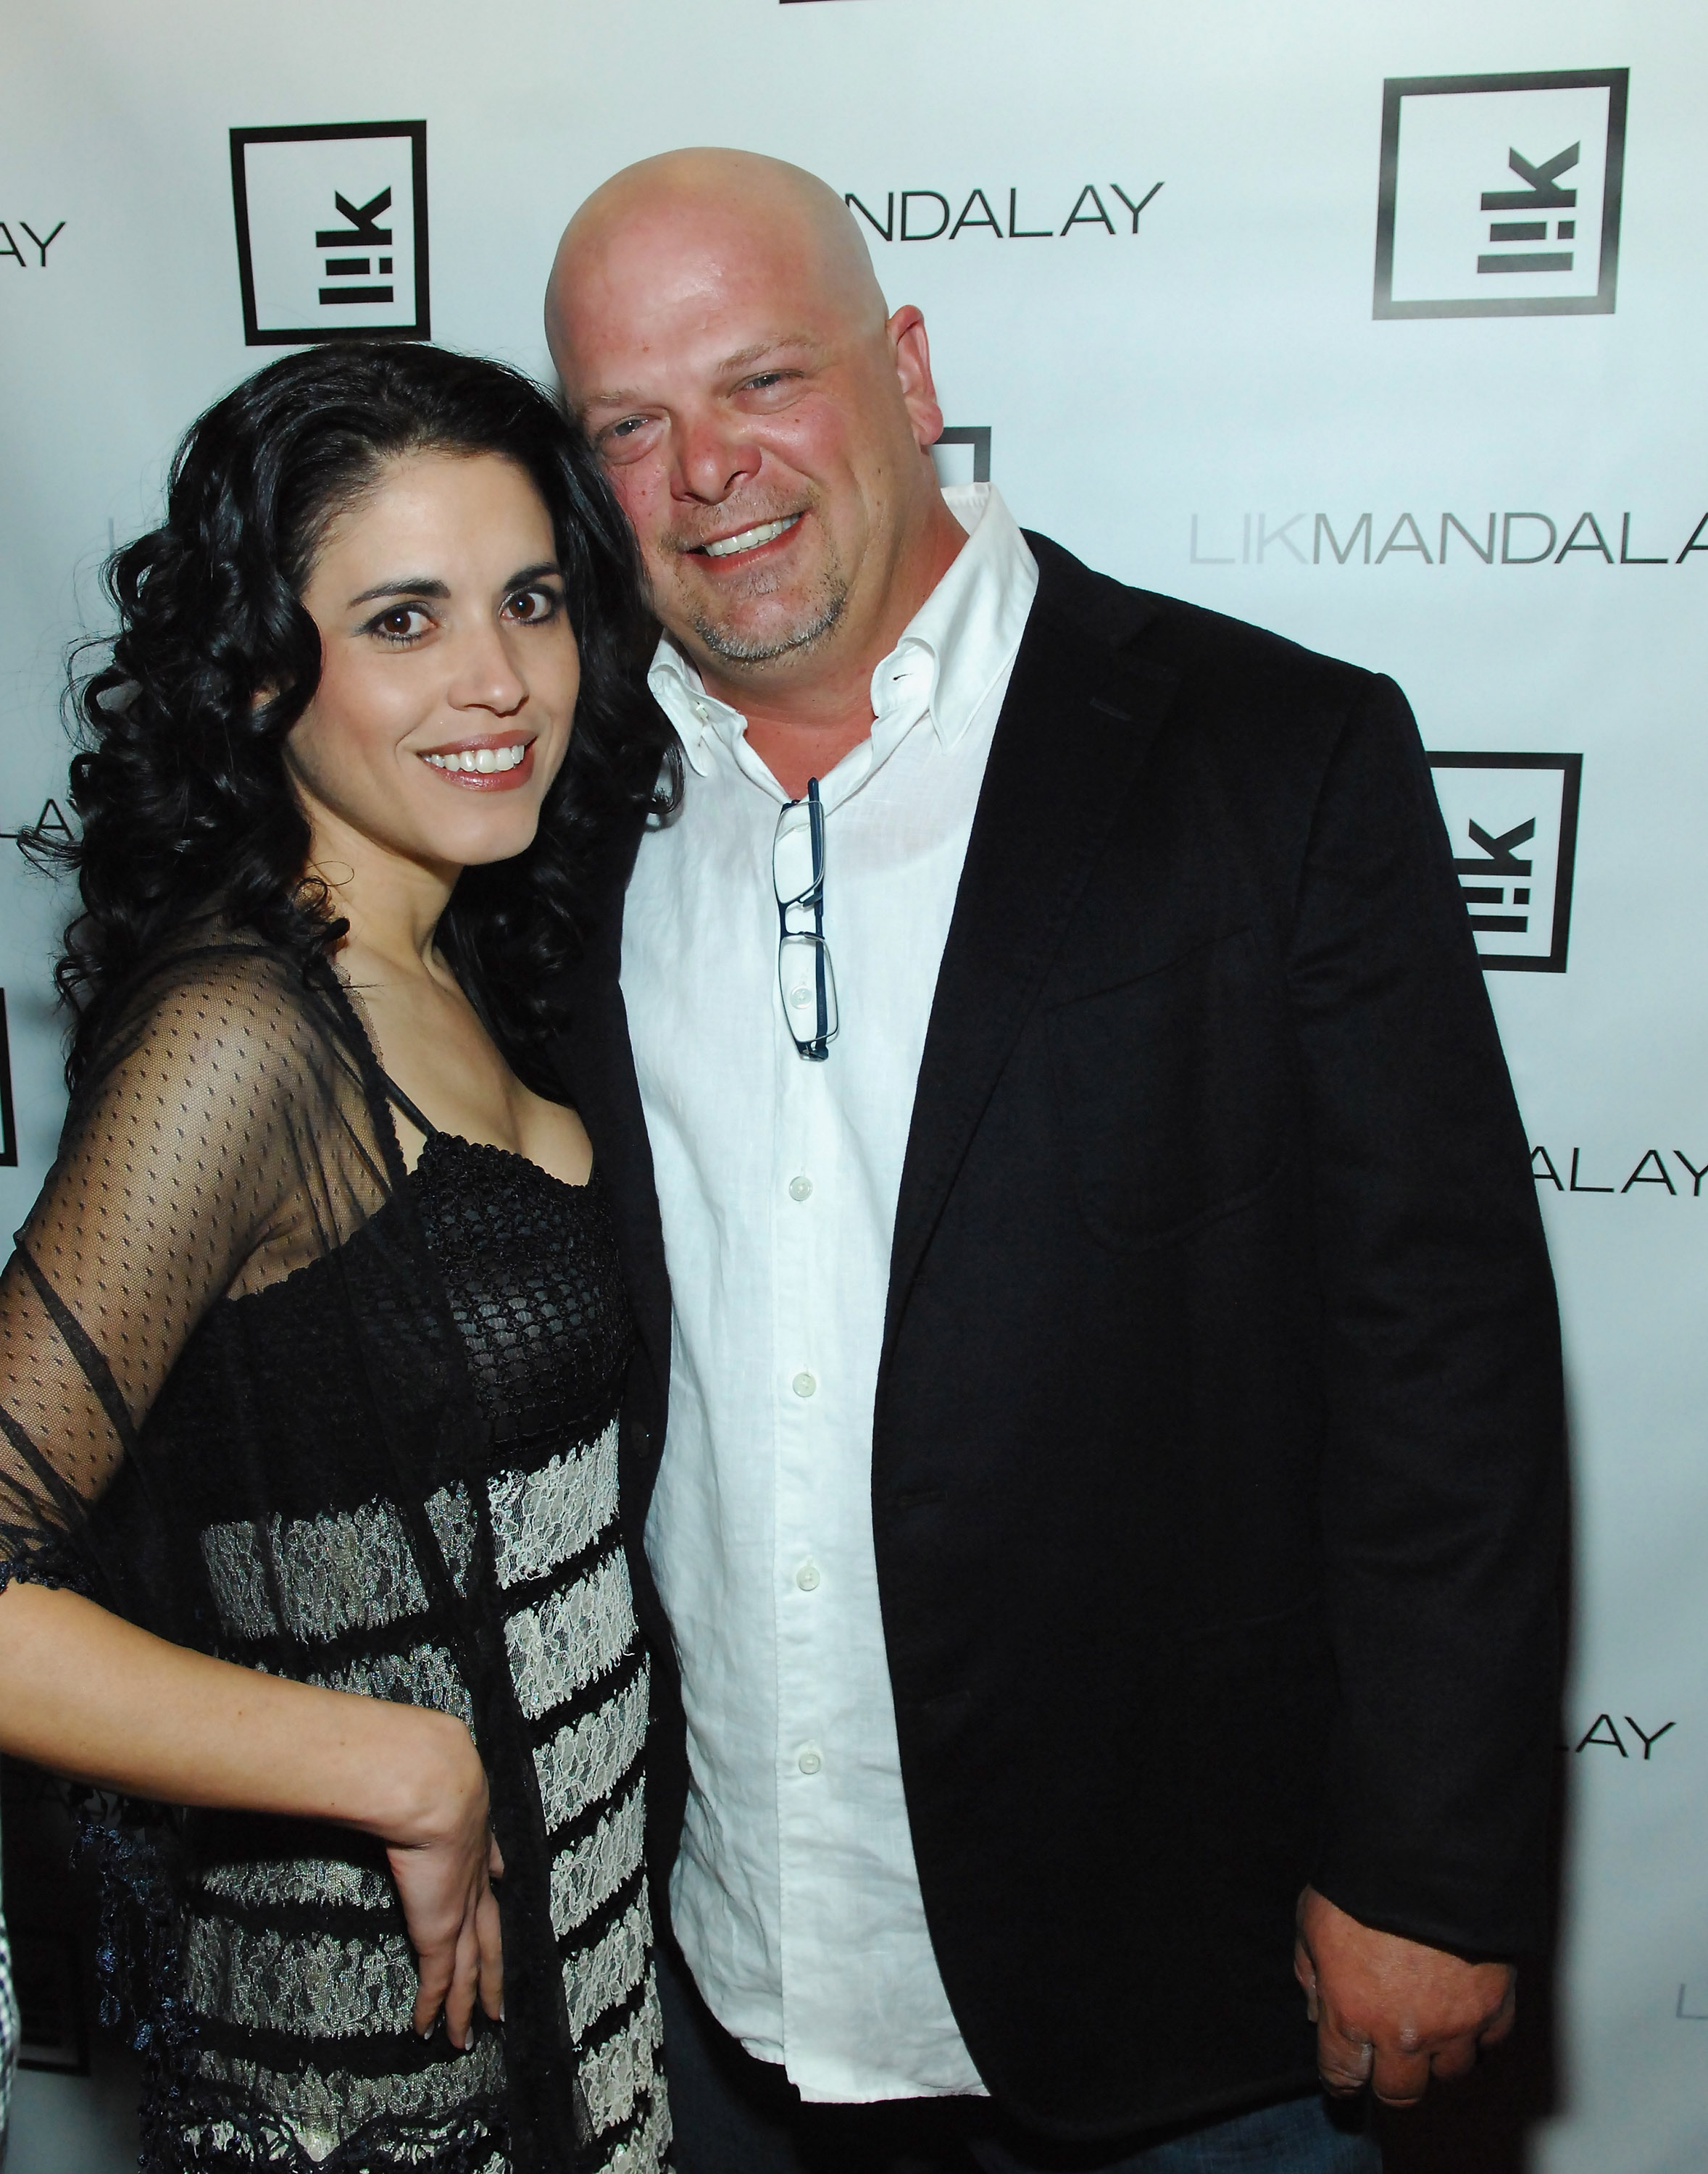 Rick Harrison and Deanna Burditt at the opening of Peter Lik's new gallery on February 25, 2012, in Las Vegas, Nevada. | Source: Getty Images